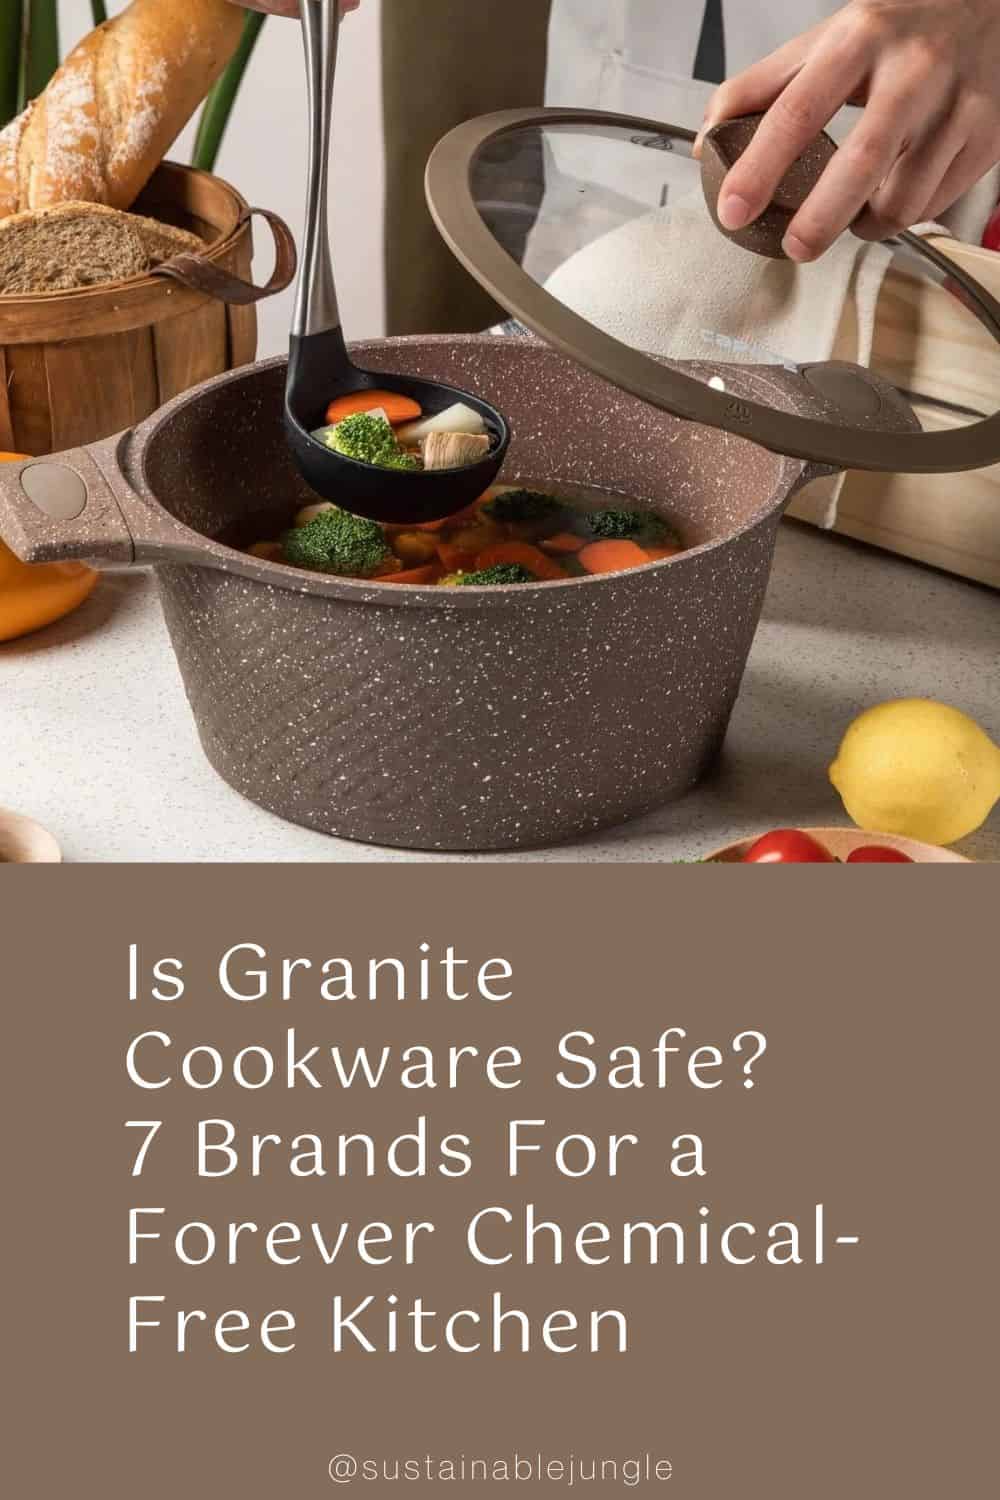 Is Granite Cookware Safe? 7 Brands For a Forever Chemical-Free Kitchen Image by Carote #granitecookware #isgranitecookwaresafe #nonstickgranitecookware #nontoxicgranitecookware #granitestonecookware #bestgranitestonecookware #isgranitestonecookwarenontoxic #sustainablejungle